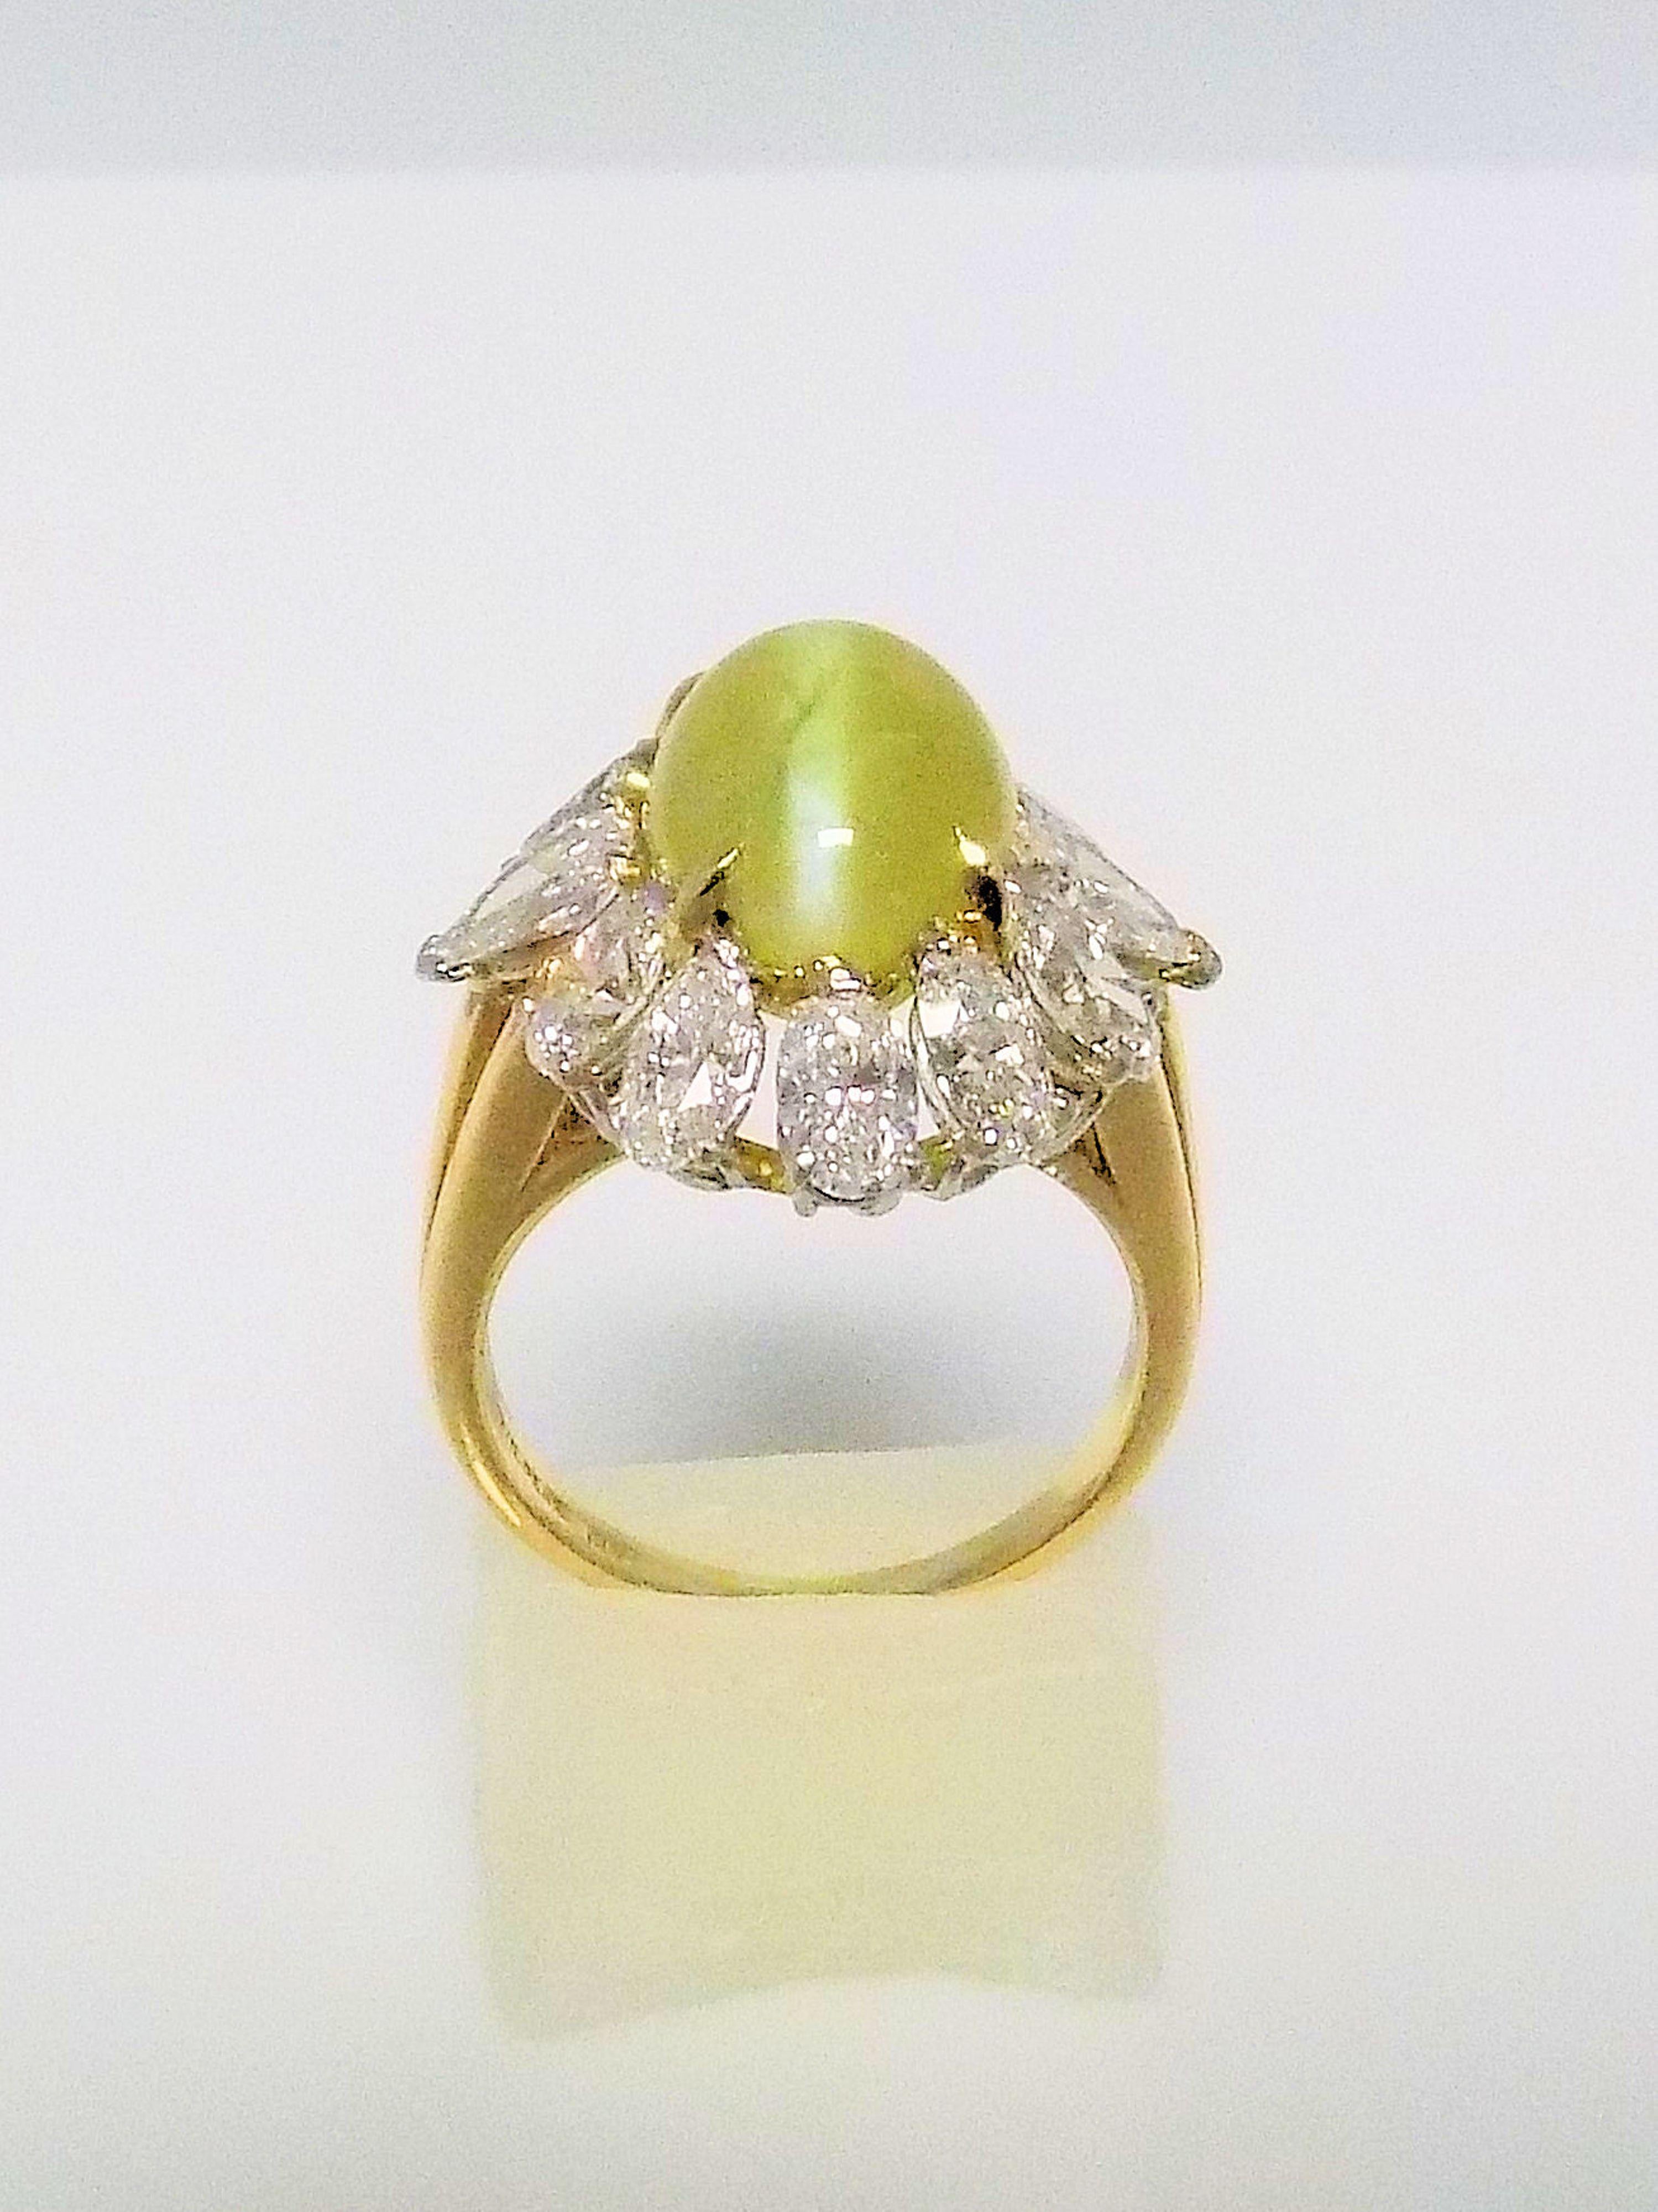 Phenomenal 18 Karat Yellow Gold Ring Featuring 1 Oval Cabochon Cut Cat's Eye Chrysoberyl (with milk & honey phenomena), Very Fine 11.71 Carat; surrounded by 10 Oval and 2 Pear Shaped Diamonds 4.50 Carat Total Weight, VVS-VS, F-G.  Finger Size 7.75;